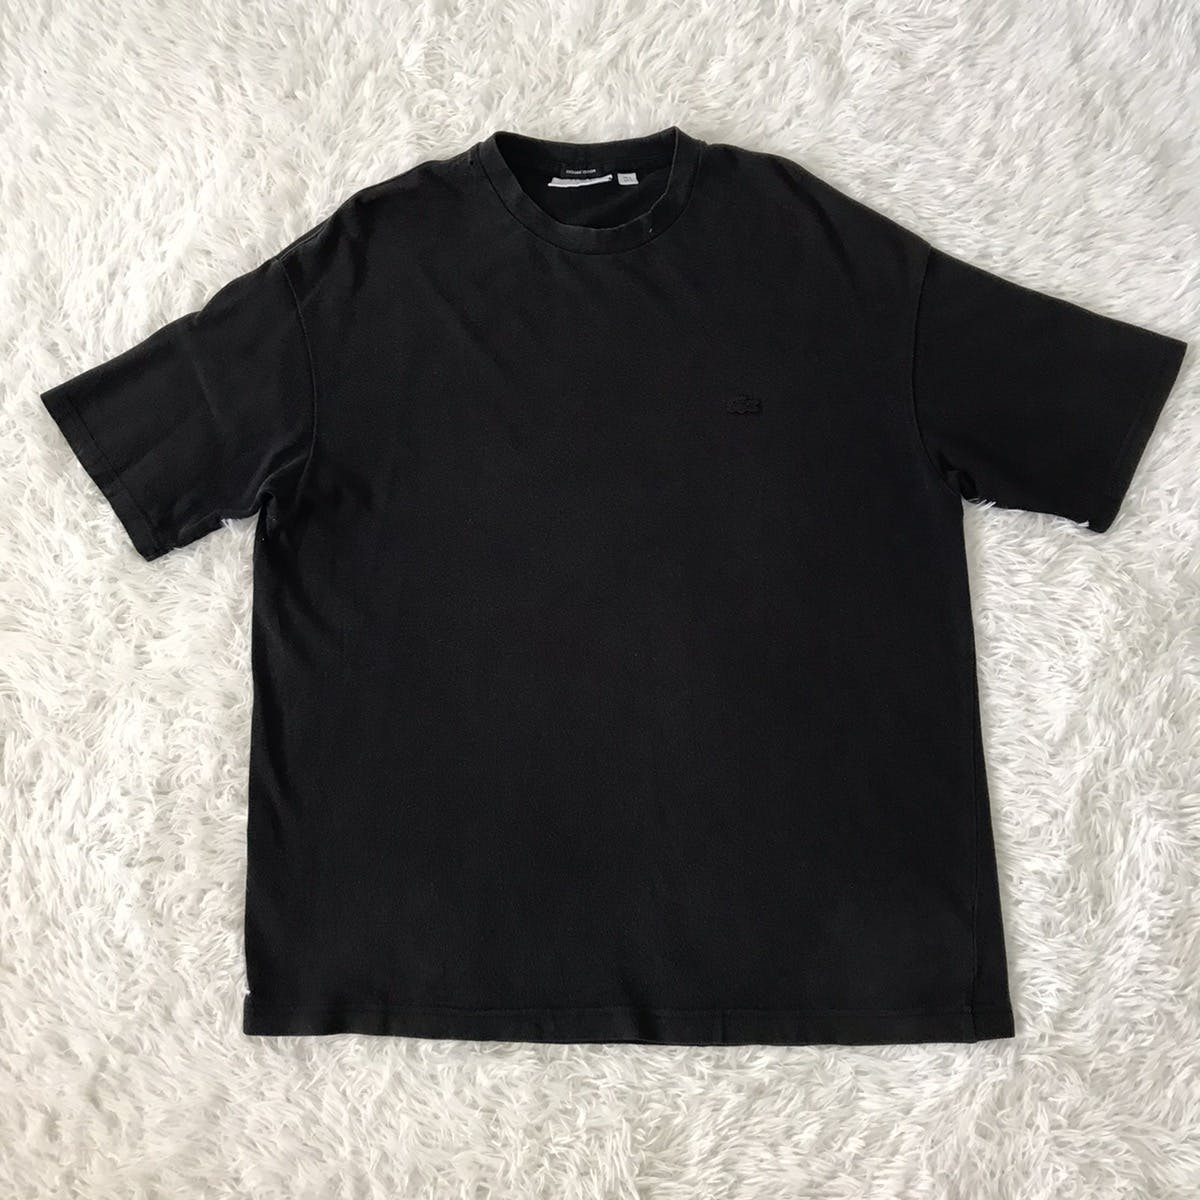 Lacoste exclusive edition tshirt (sun faded) - 16